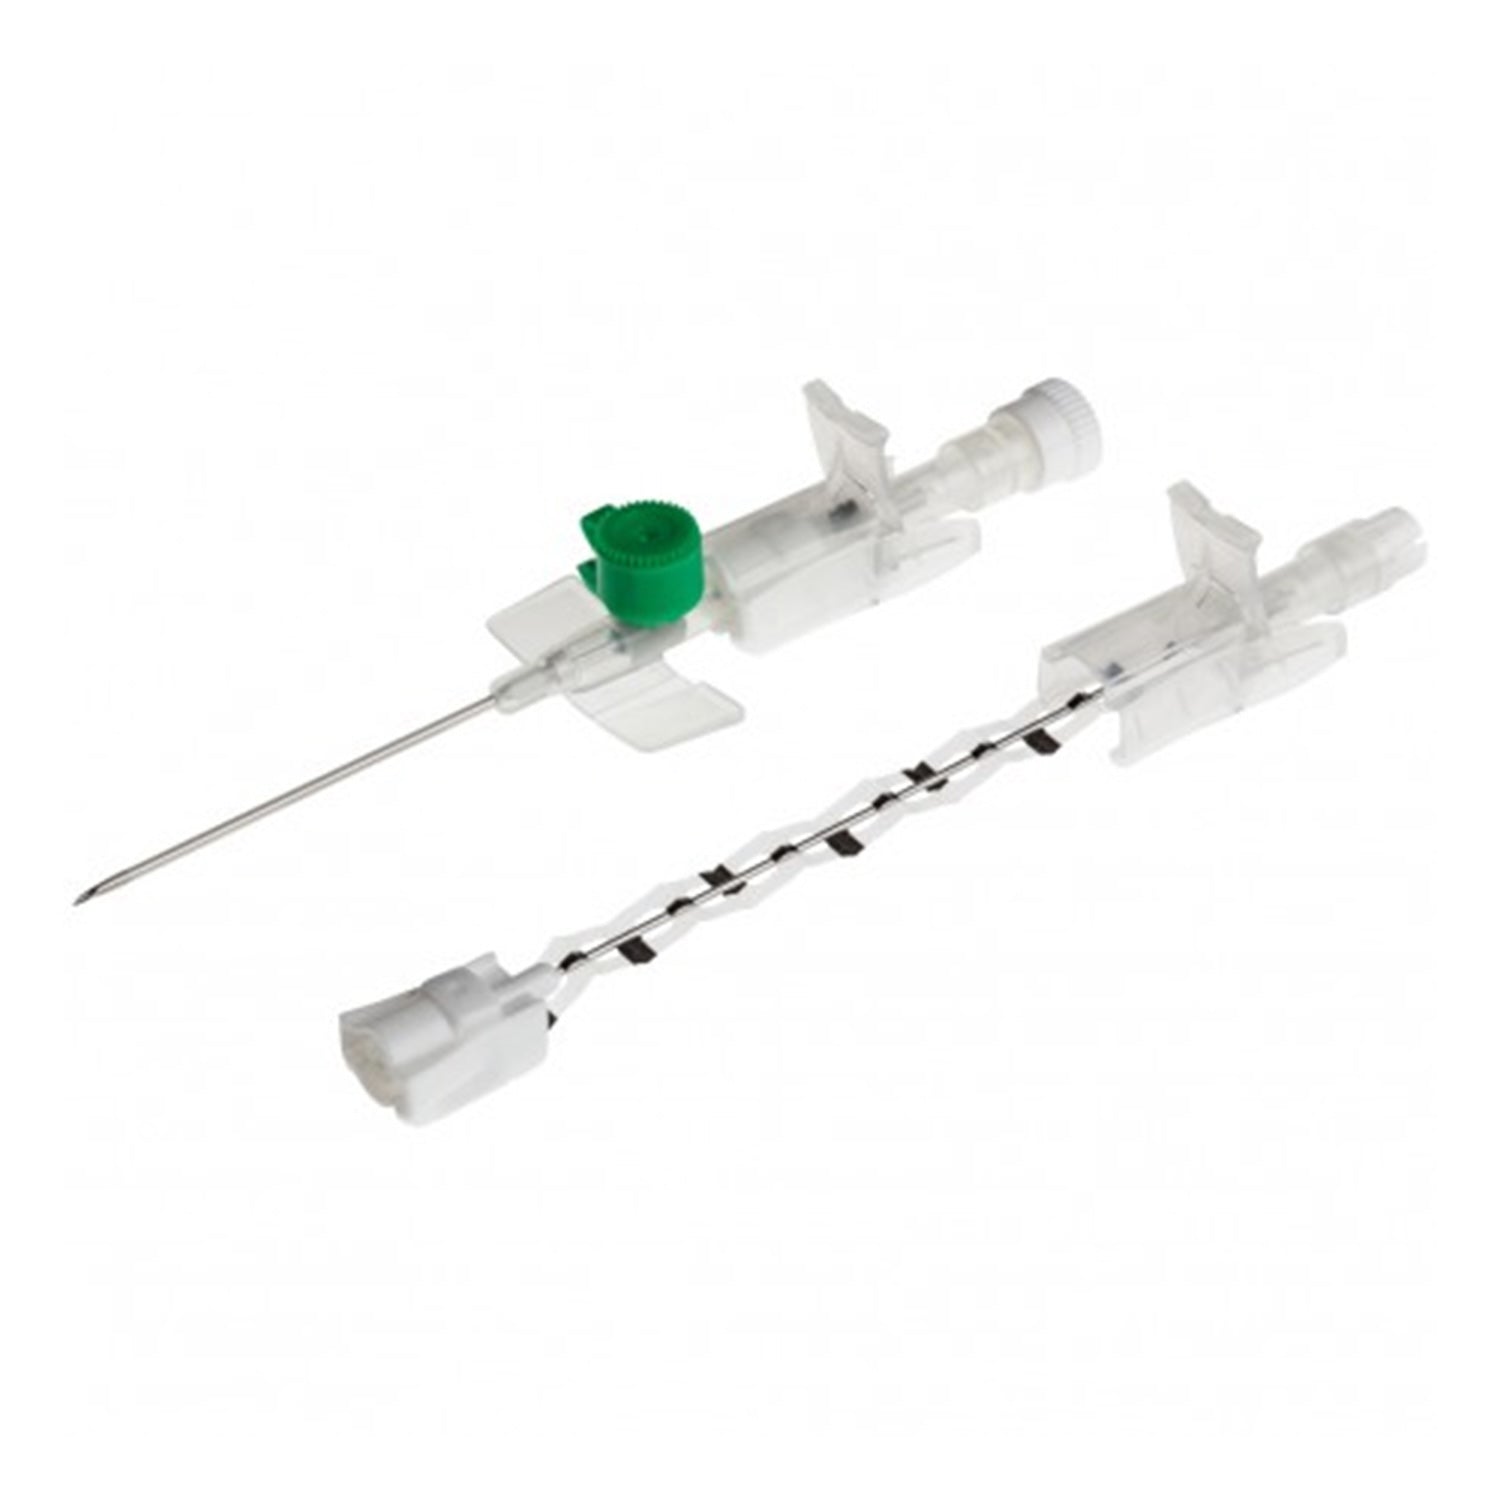 BD Venflon Pro Safety Peripheral IV Cannula with Injection Port | Green | 18G x 32 x 1.3mm | Pack of 50